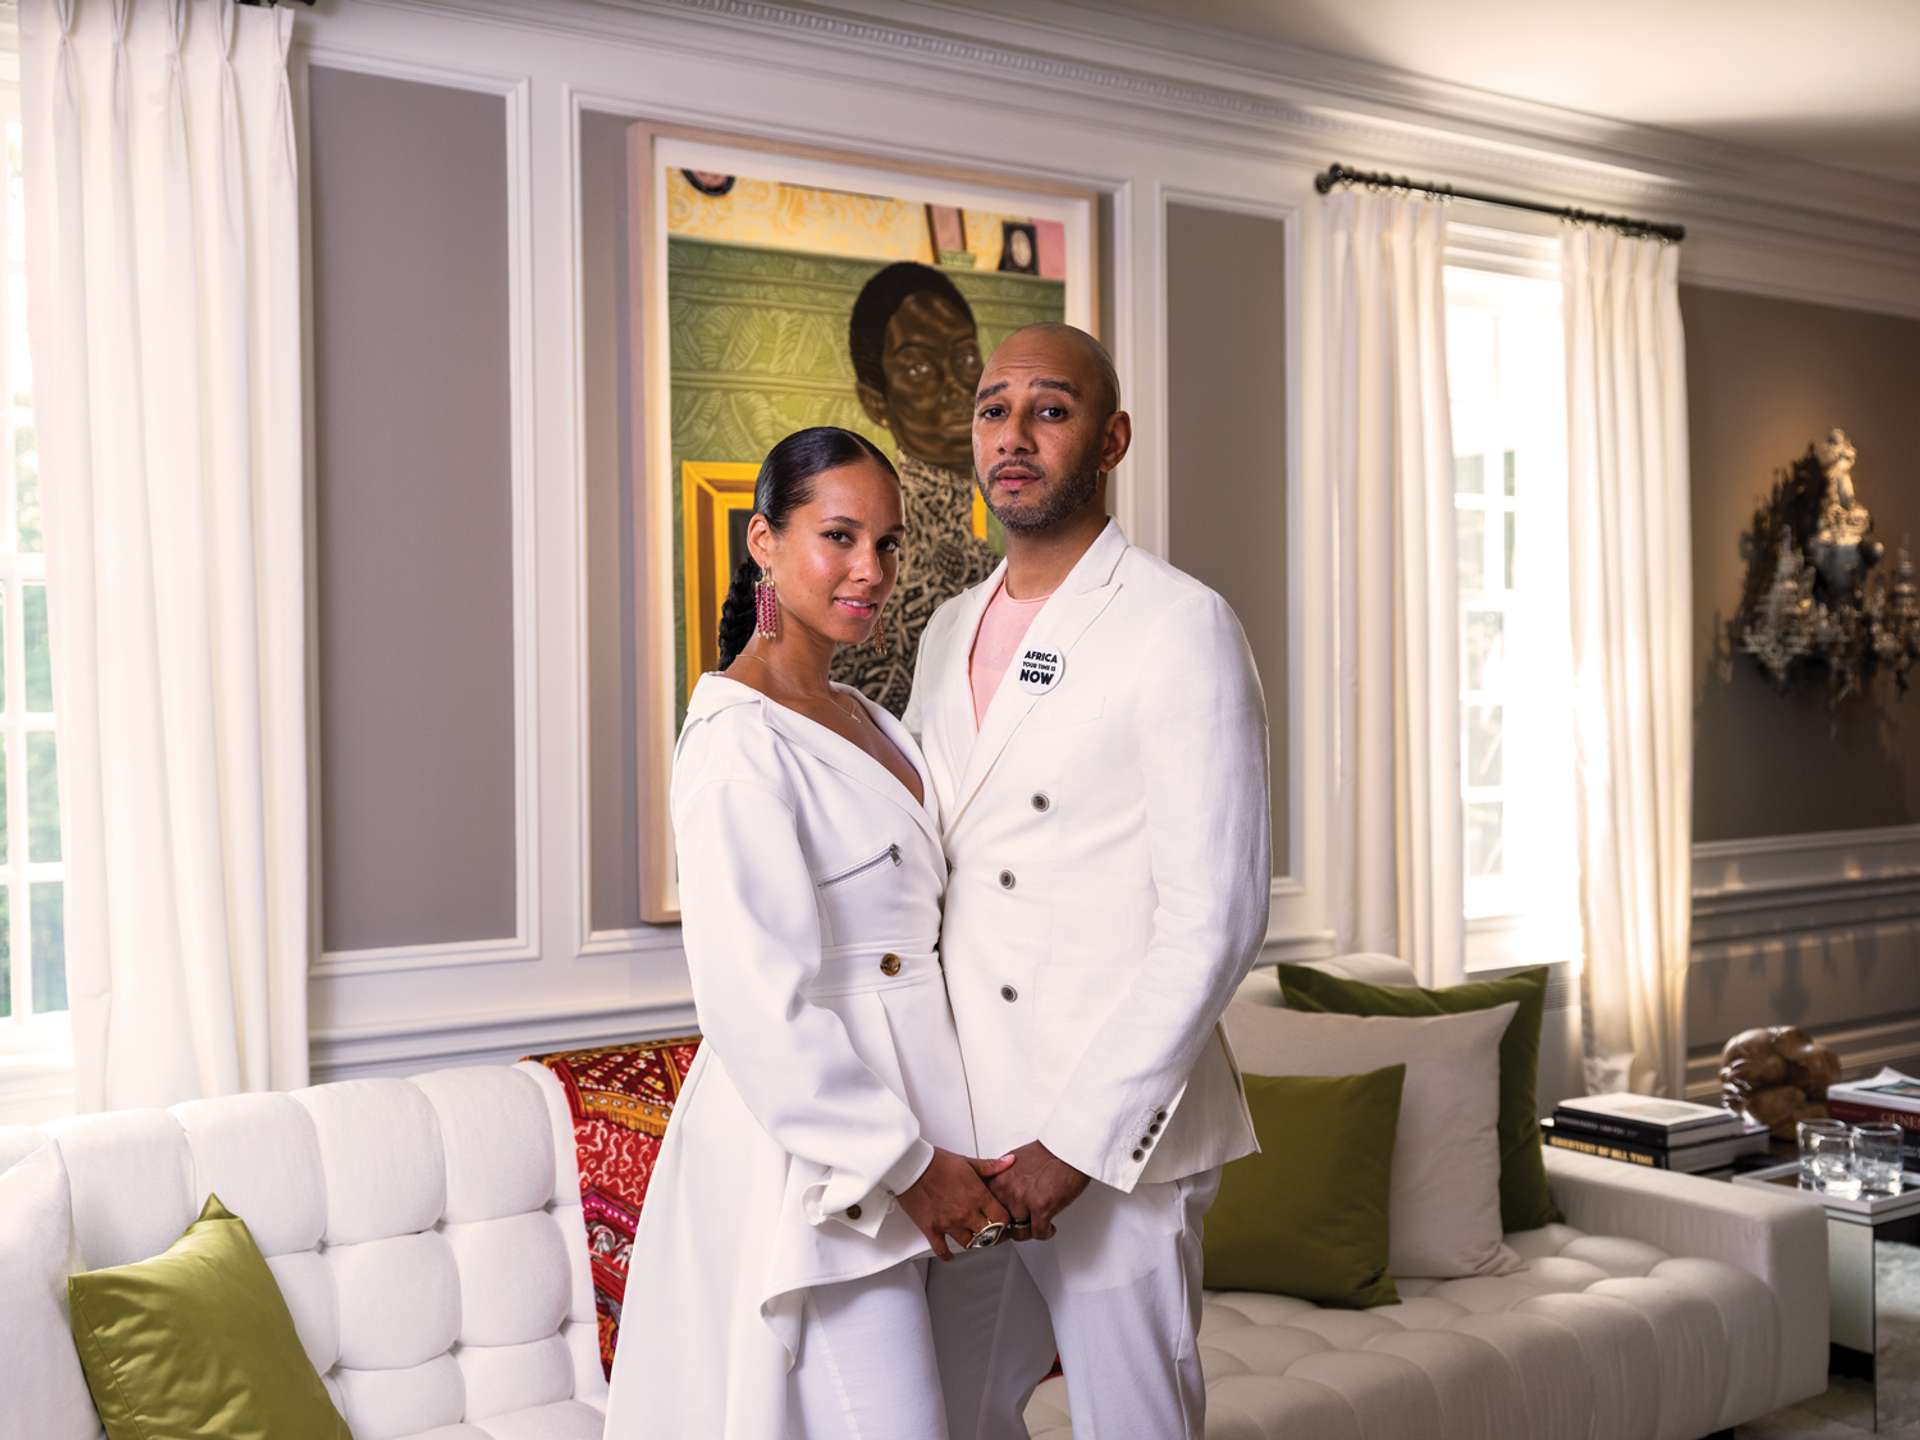 Alicia Keys and Kasseem “Swizz Beatz” Dean photographed in their home in Englewood, New Jersey